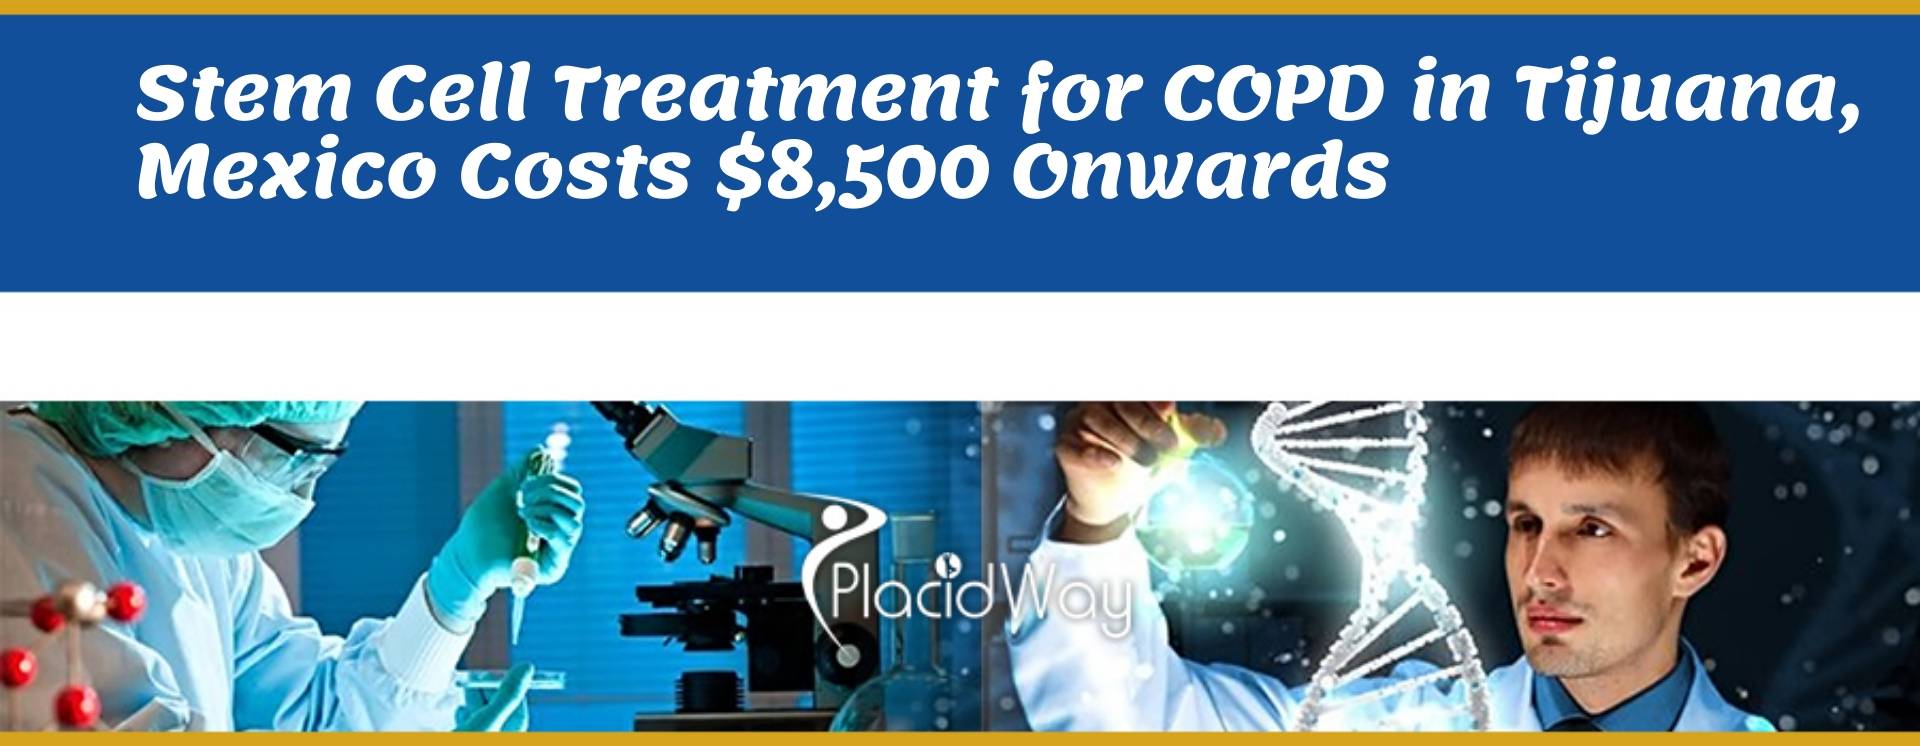 Cost of Stem Cell Treatment for COPD in Tijuana, Mexico